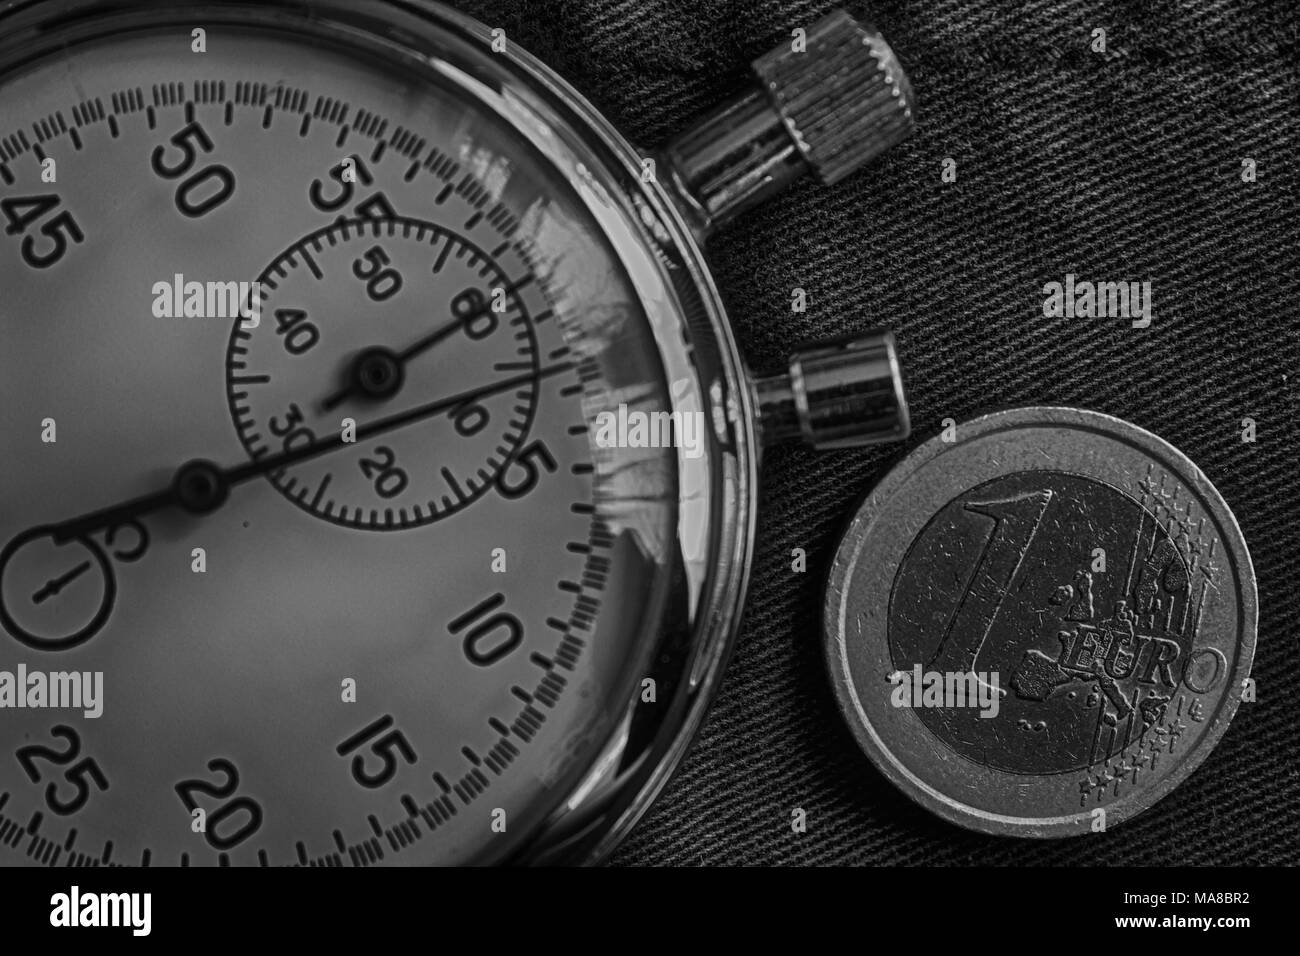 Euro coin with a denomination of one euro and stopwatch on old jeans backdrop - business background. Stock Photo